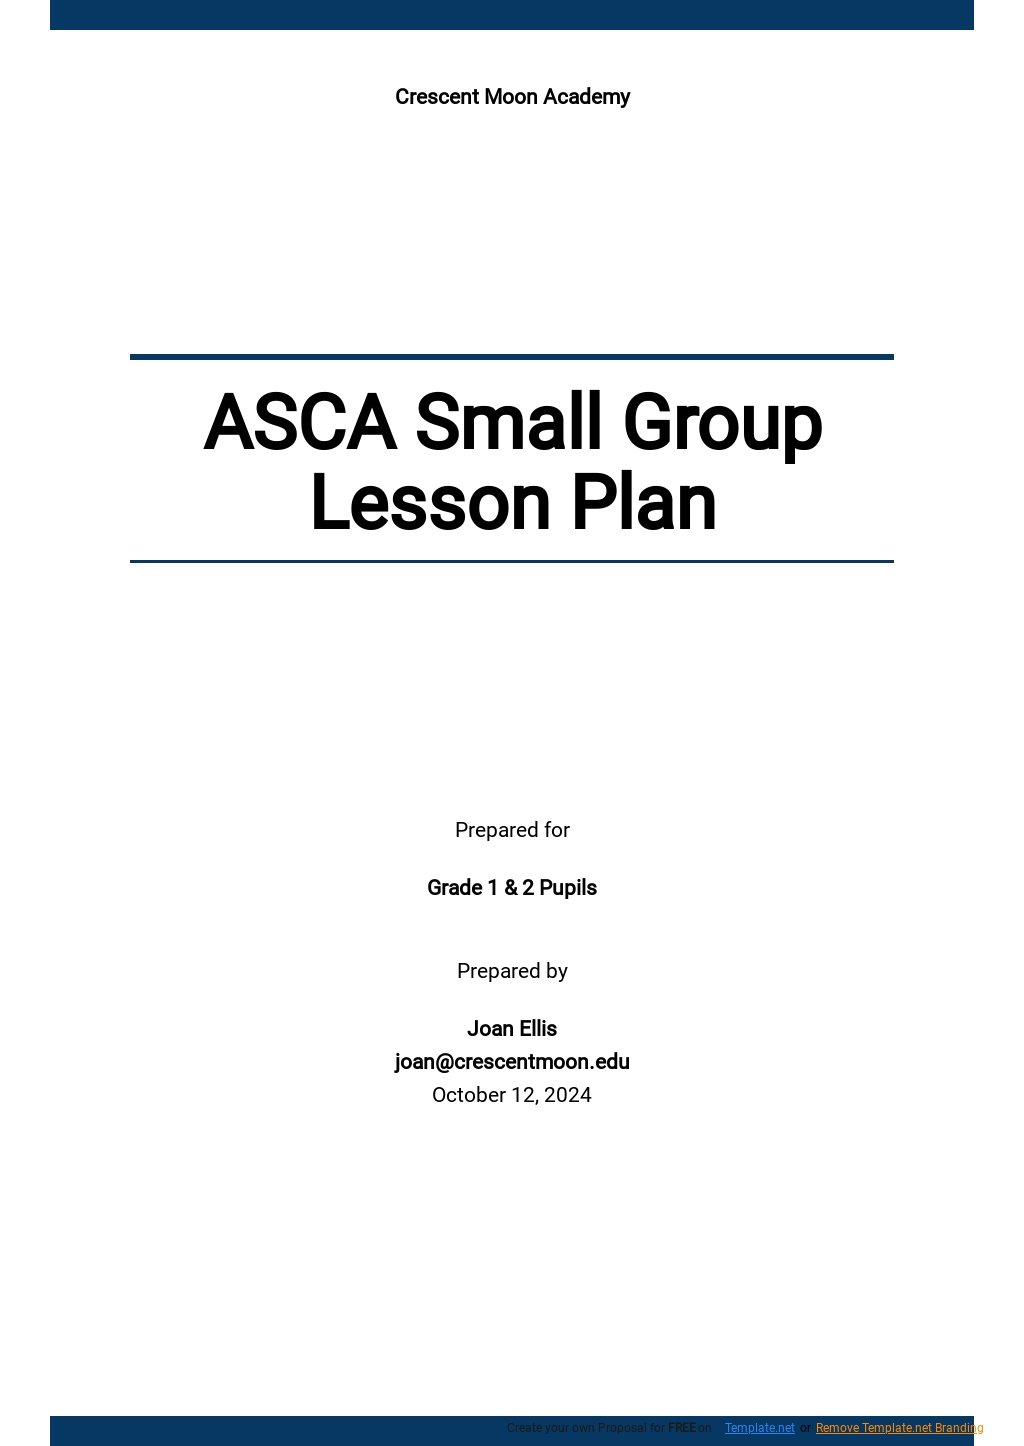 Free ASCA Small Group Lesson Plan Template